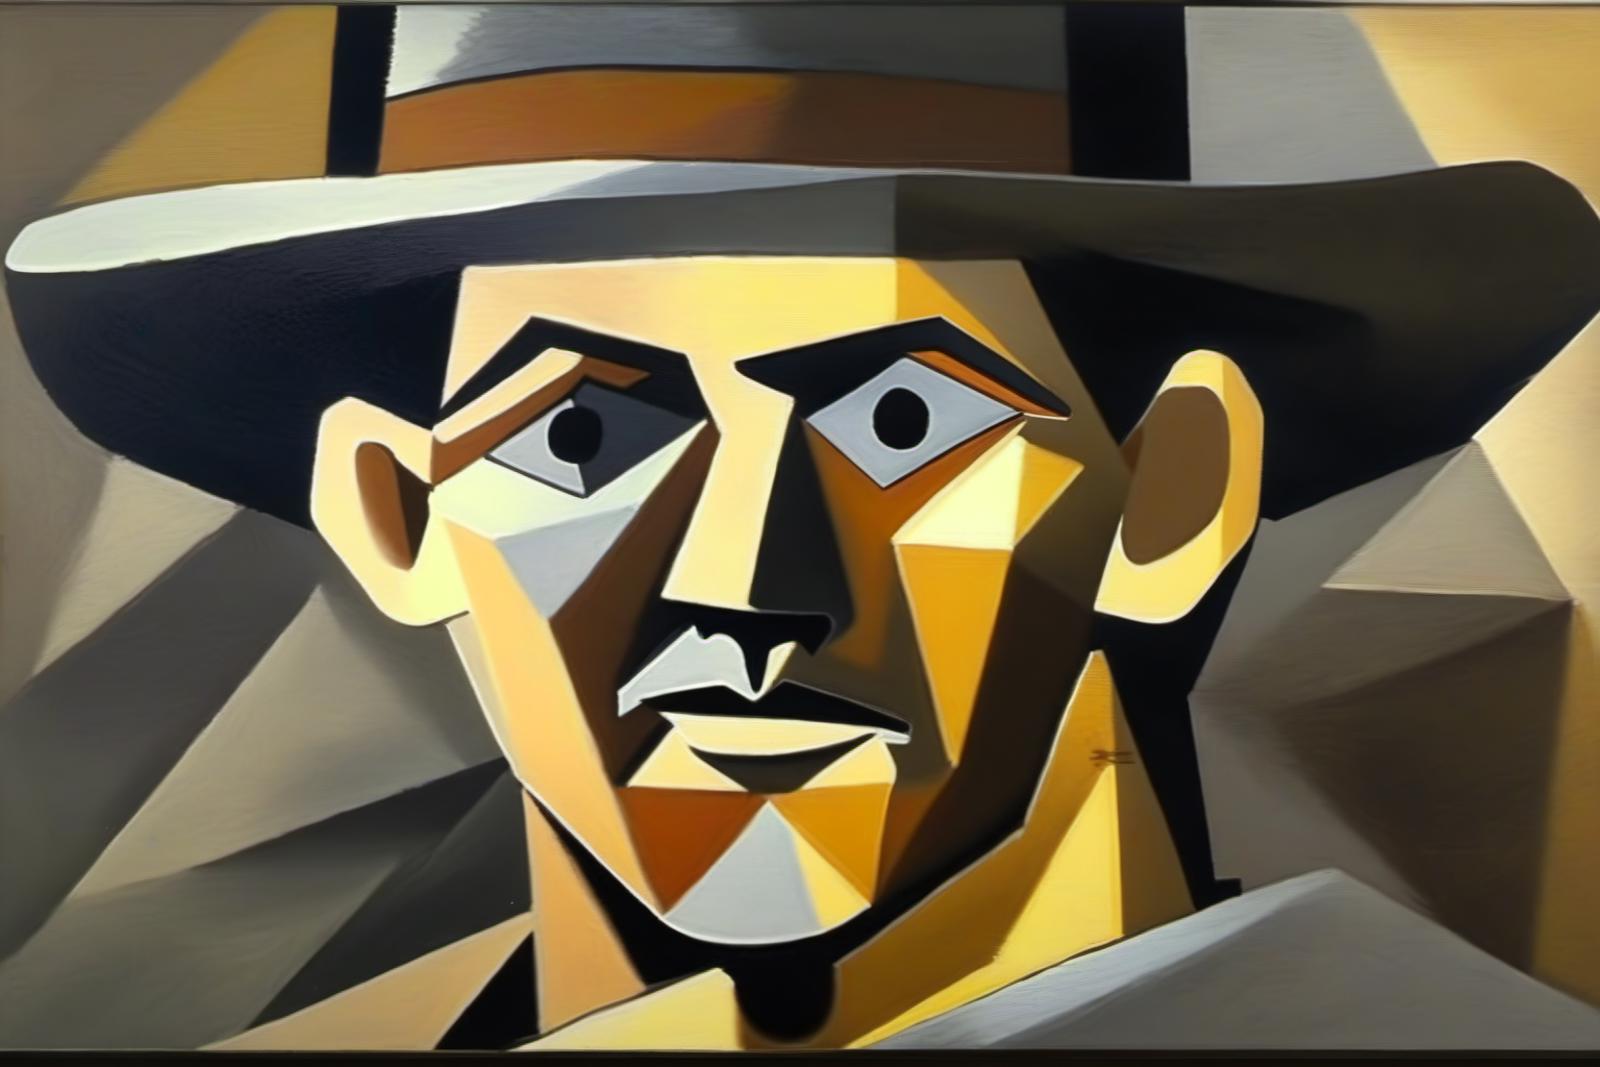 A painting of a man with a hat and big eyes.